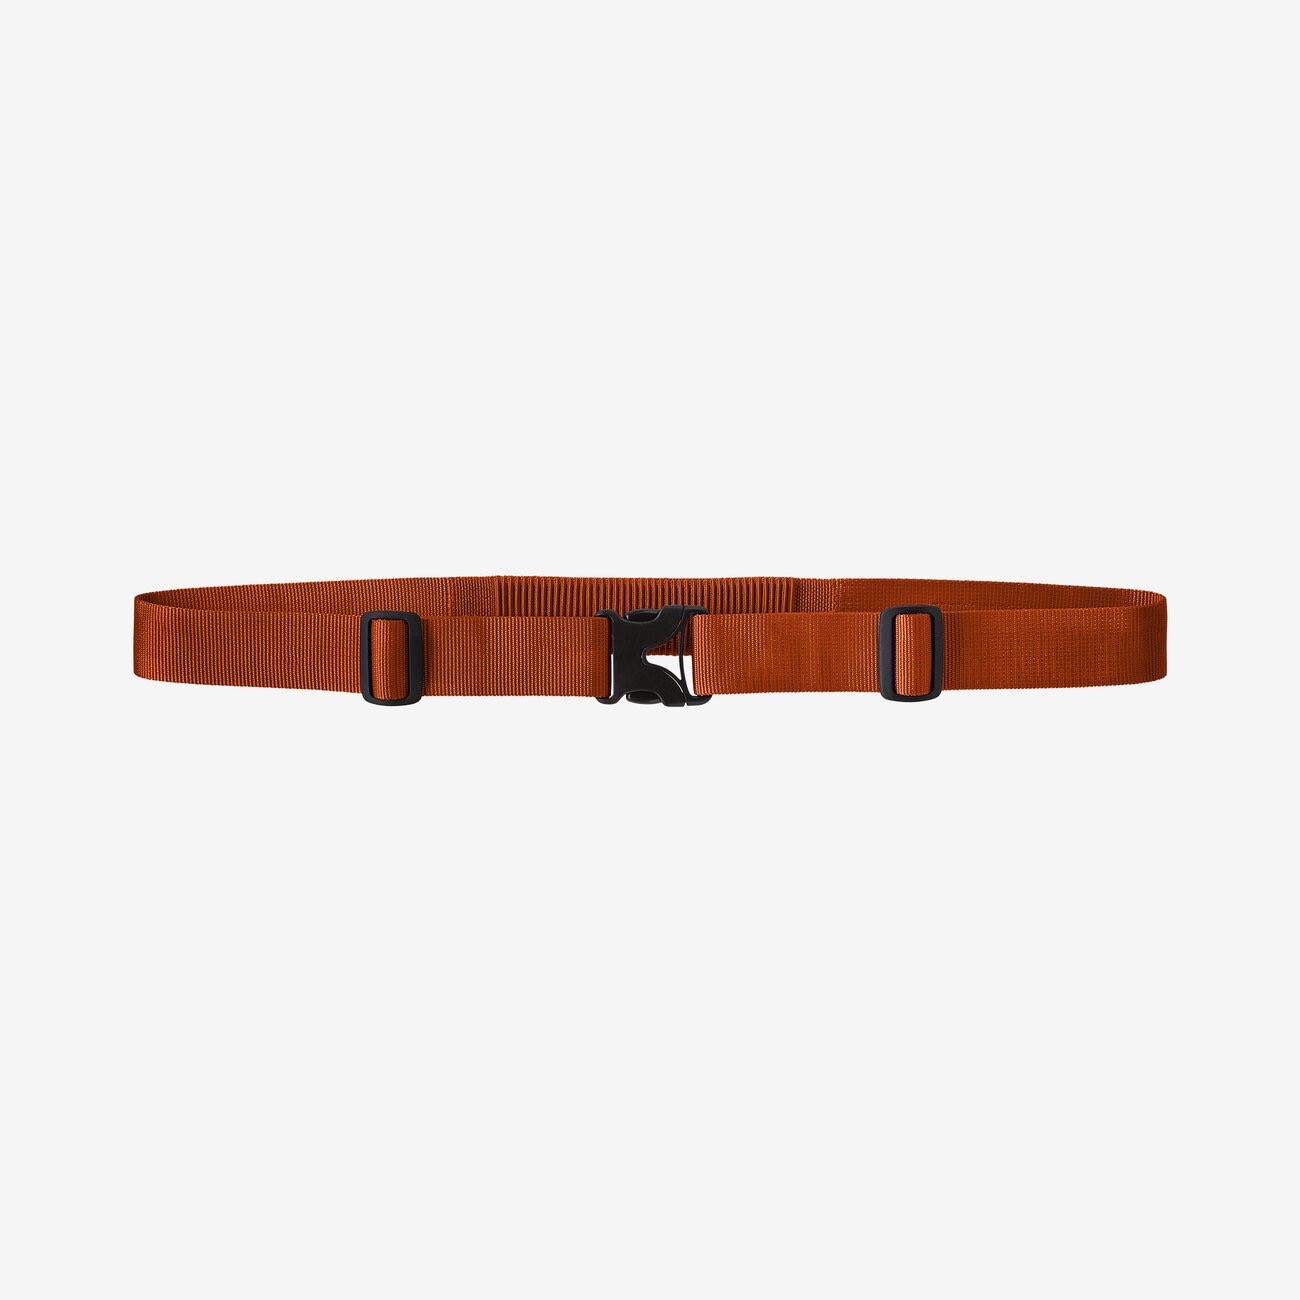 Patagonia Secure Stretch Wading Belt - Sandhill Rust - Small